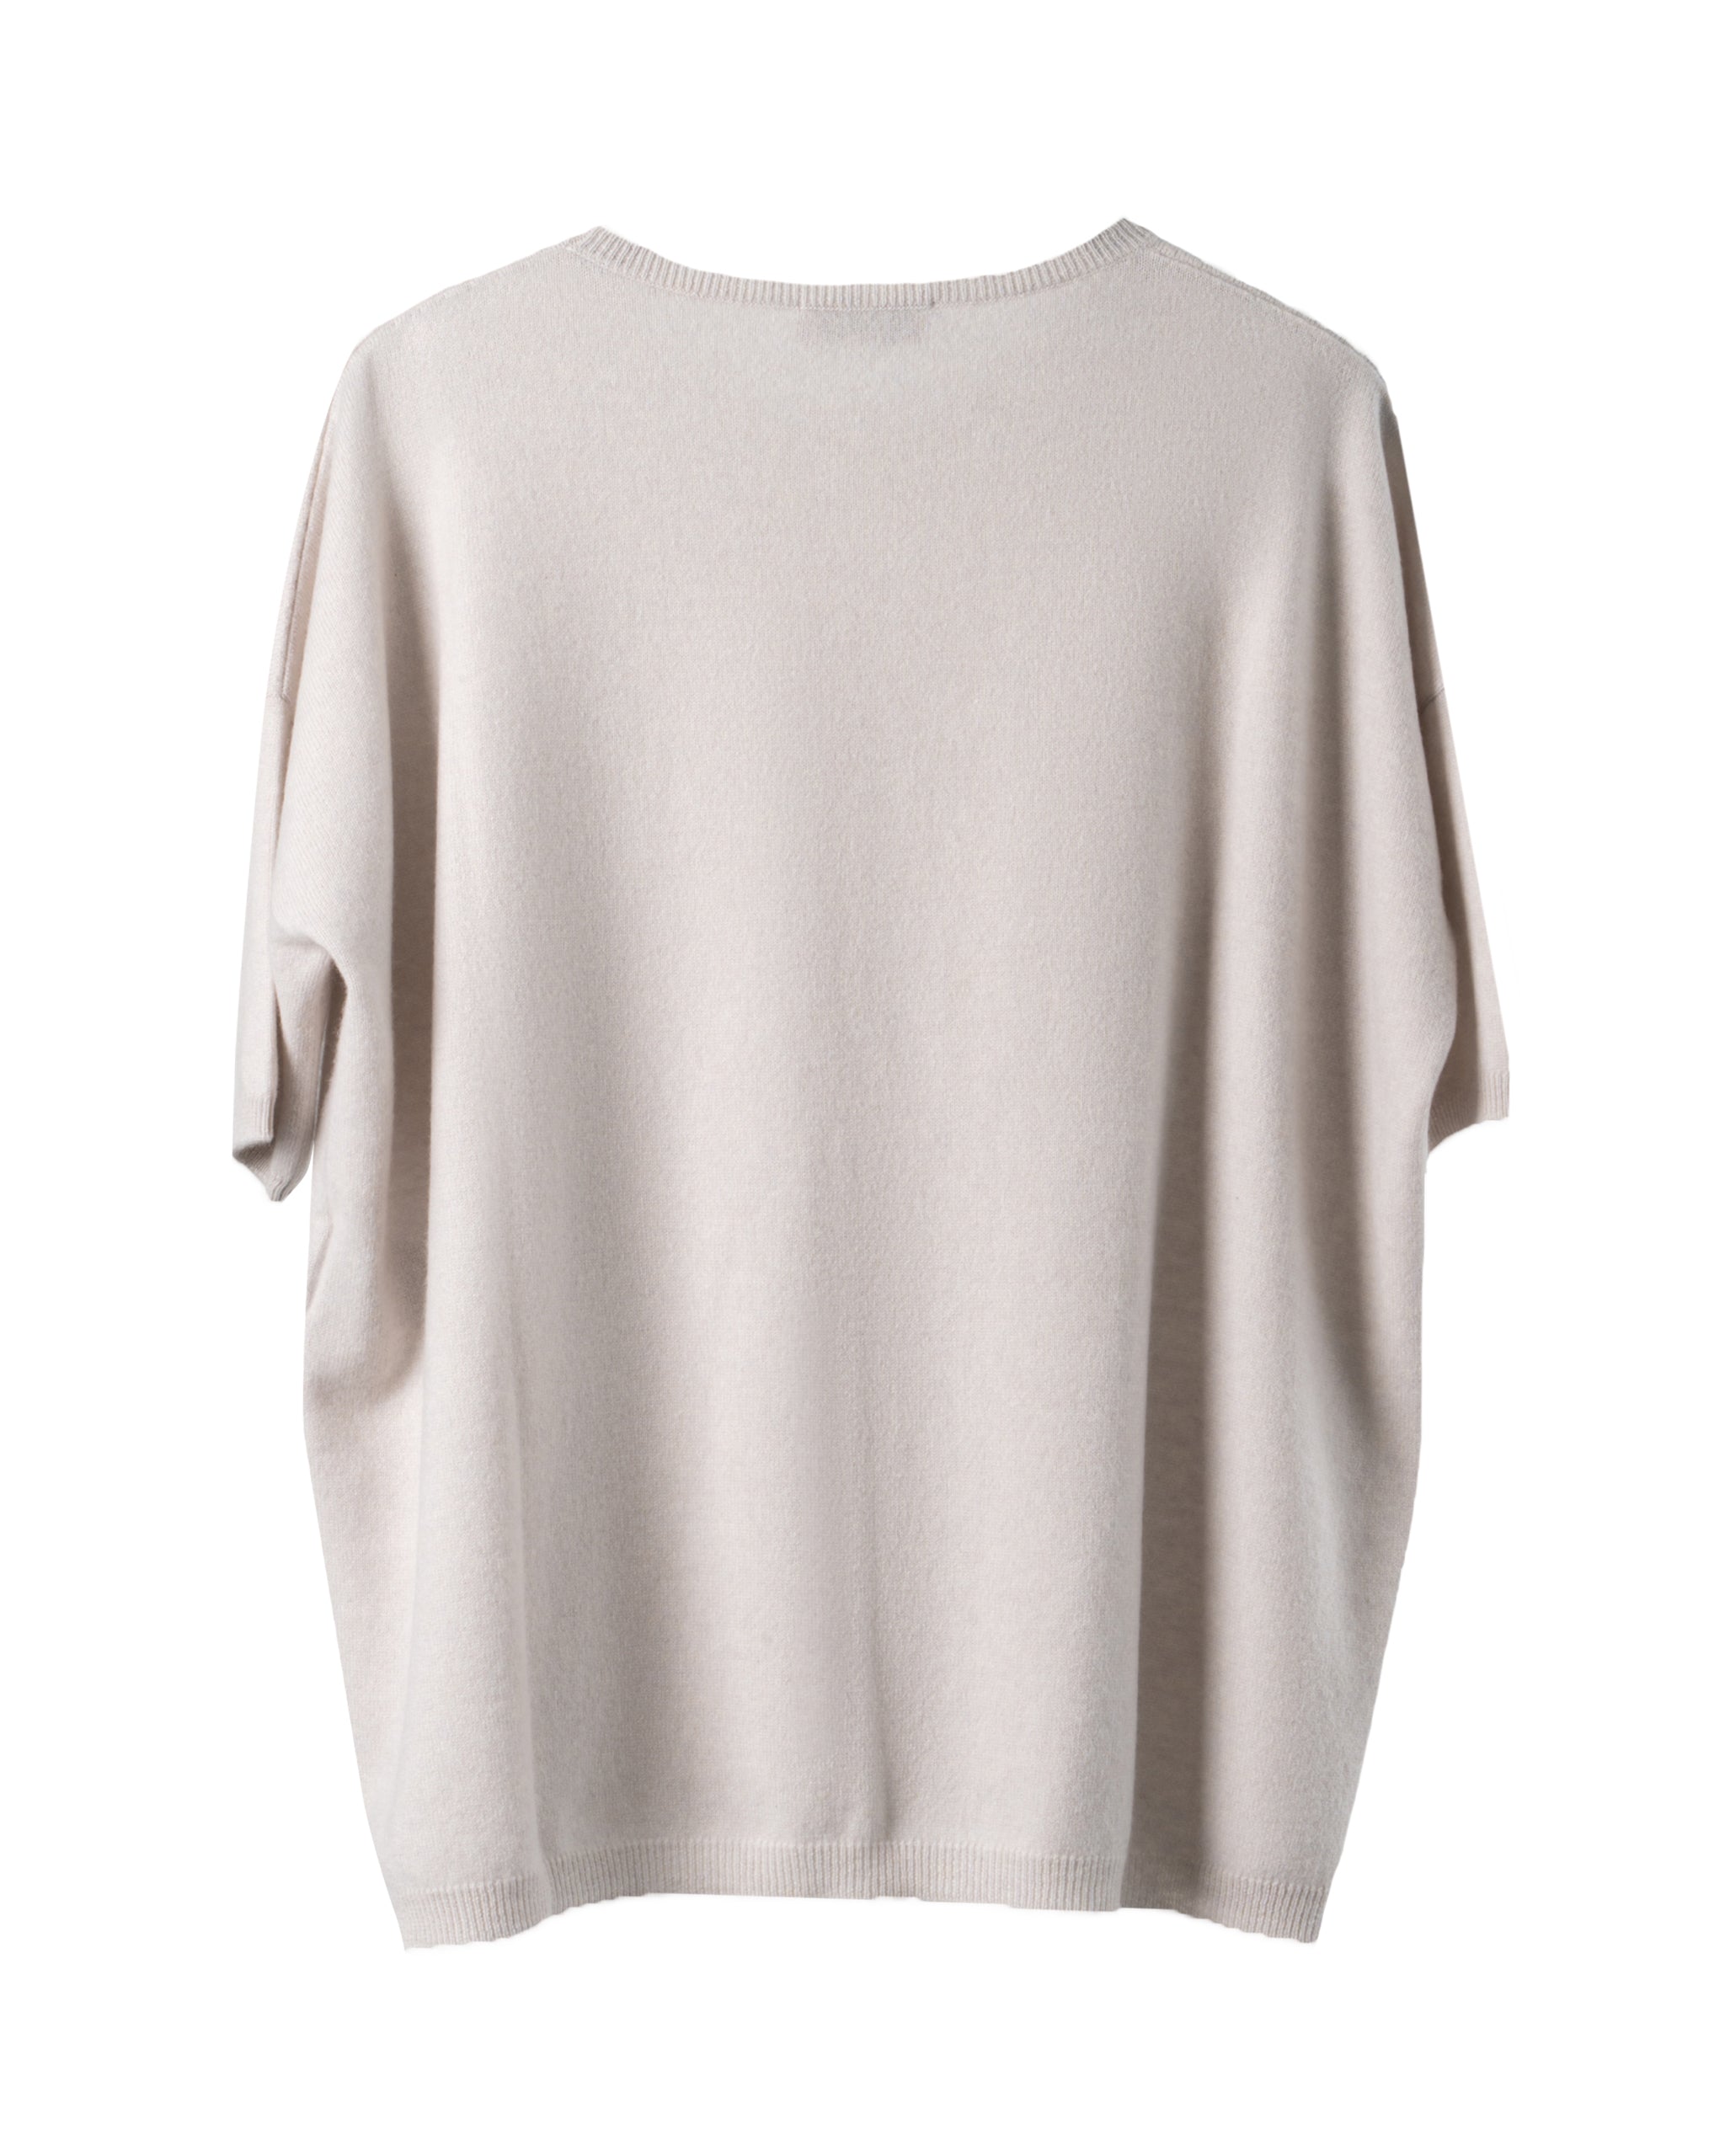 2PLY CASHMERE-OVERSIZE CREW NECK SWEATER